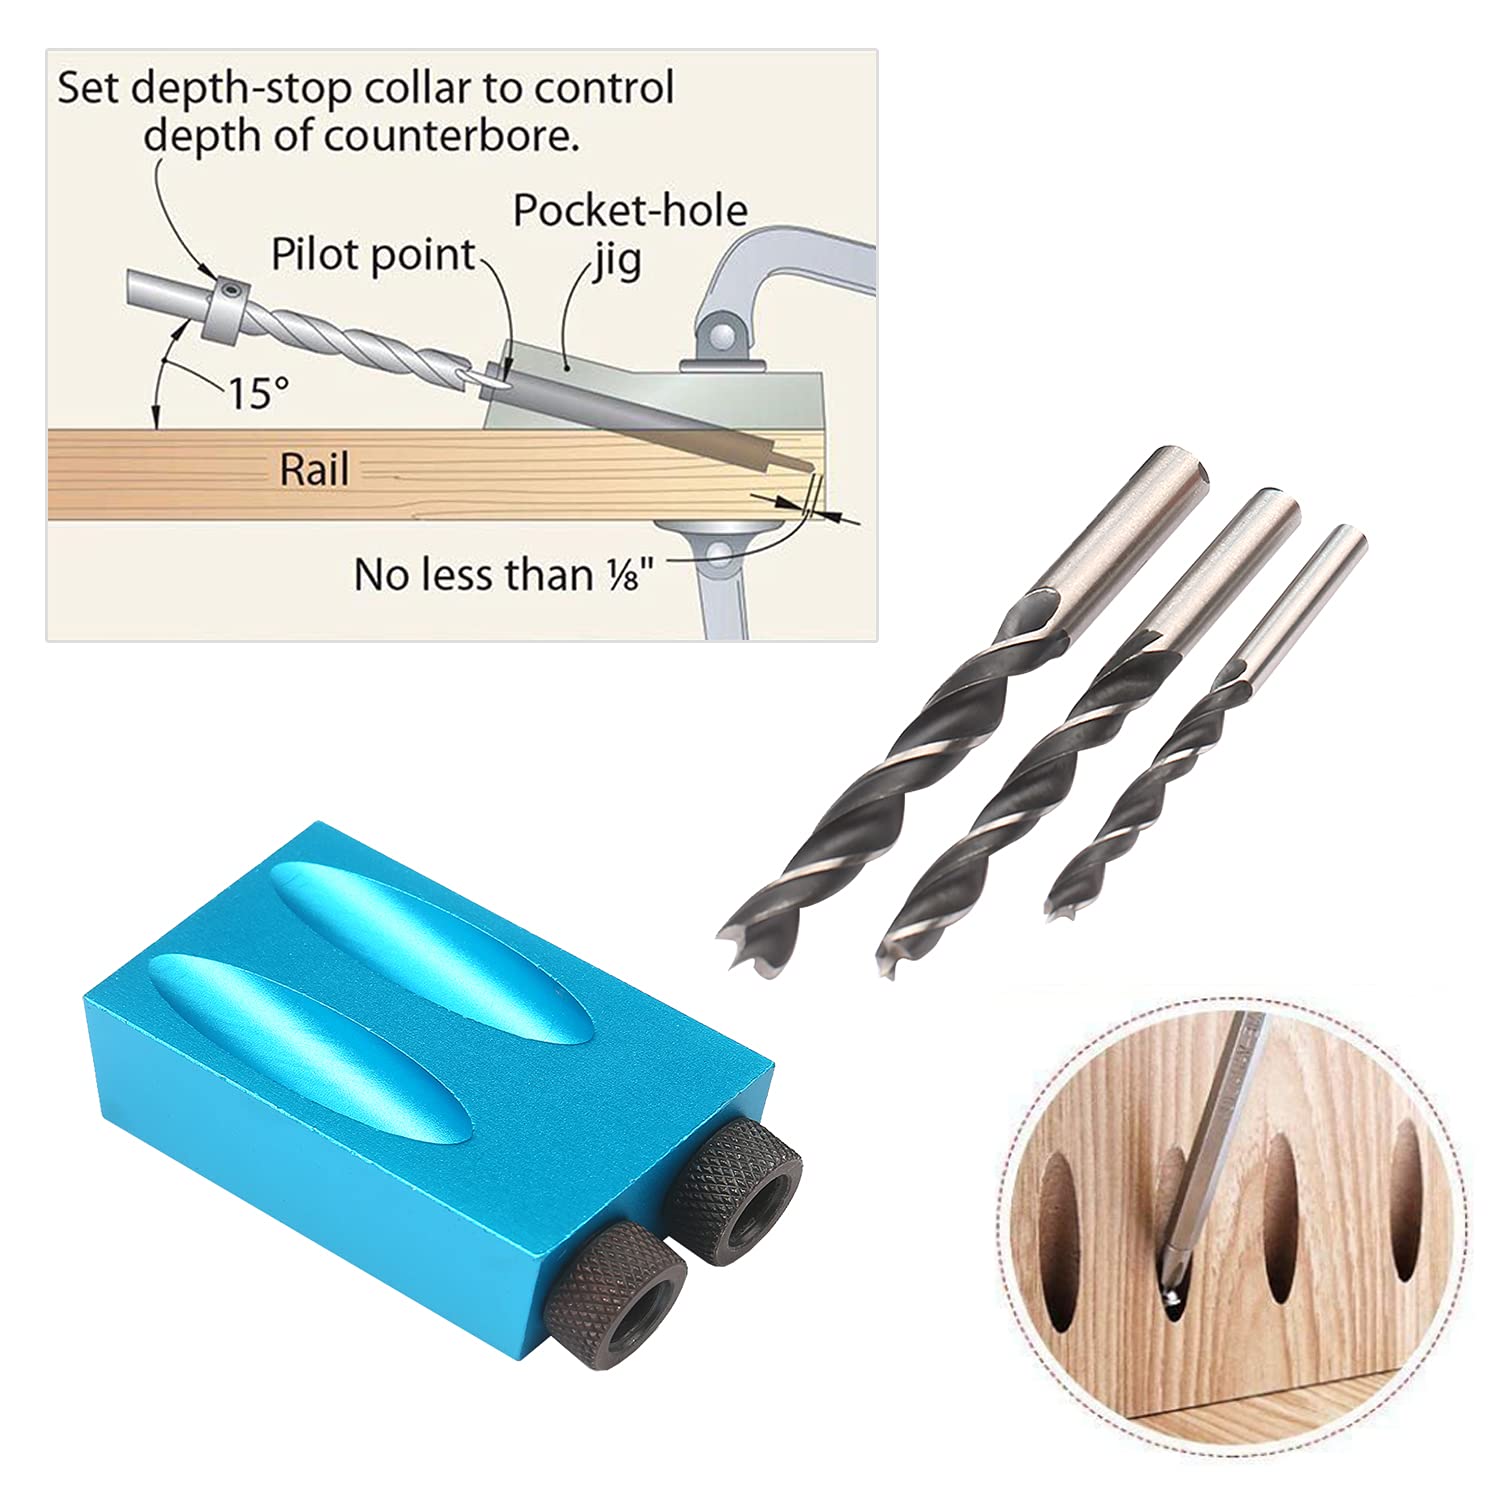 15Pcs Pocket Hole Jig, 15 Degree Dowel Drill Joinery Kit Hole Screw Jig with 6/8/10mm Drive Adapter for Woodworking Angle Drilling Holes, Angle Carpentry Locator Jig